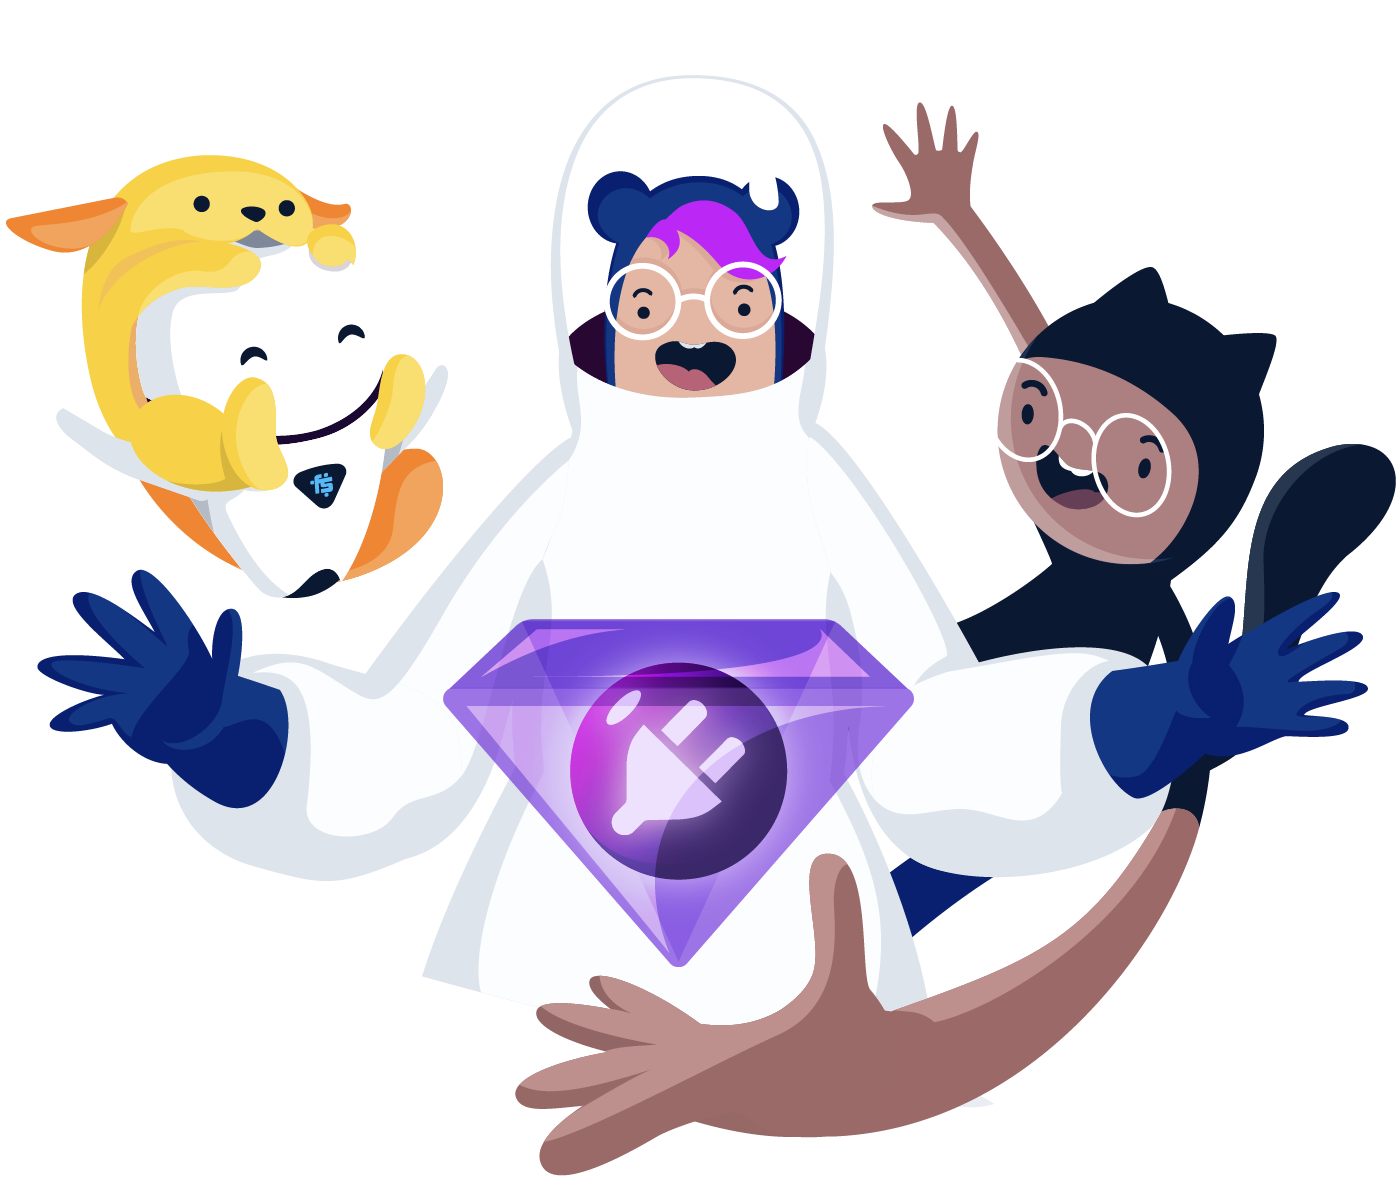 a group of people in space suits, one holding a purple gem in their hand